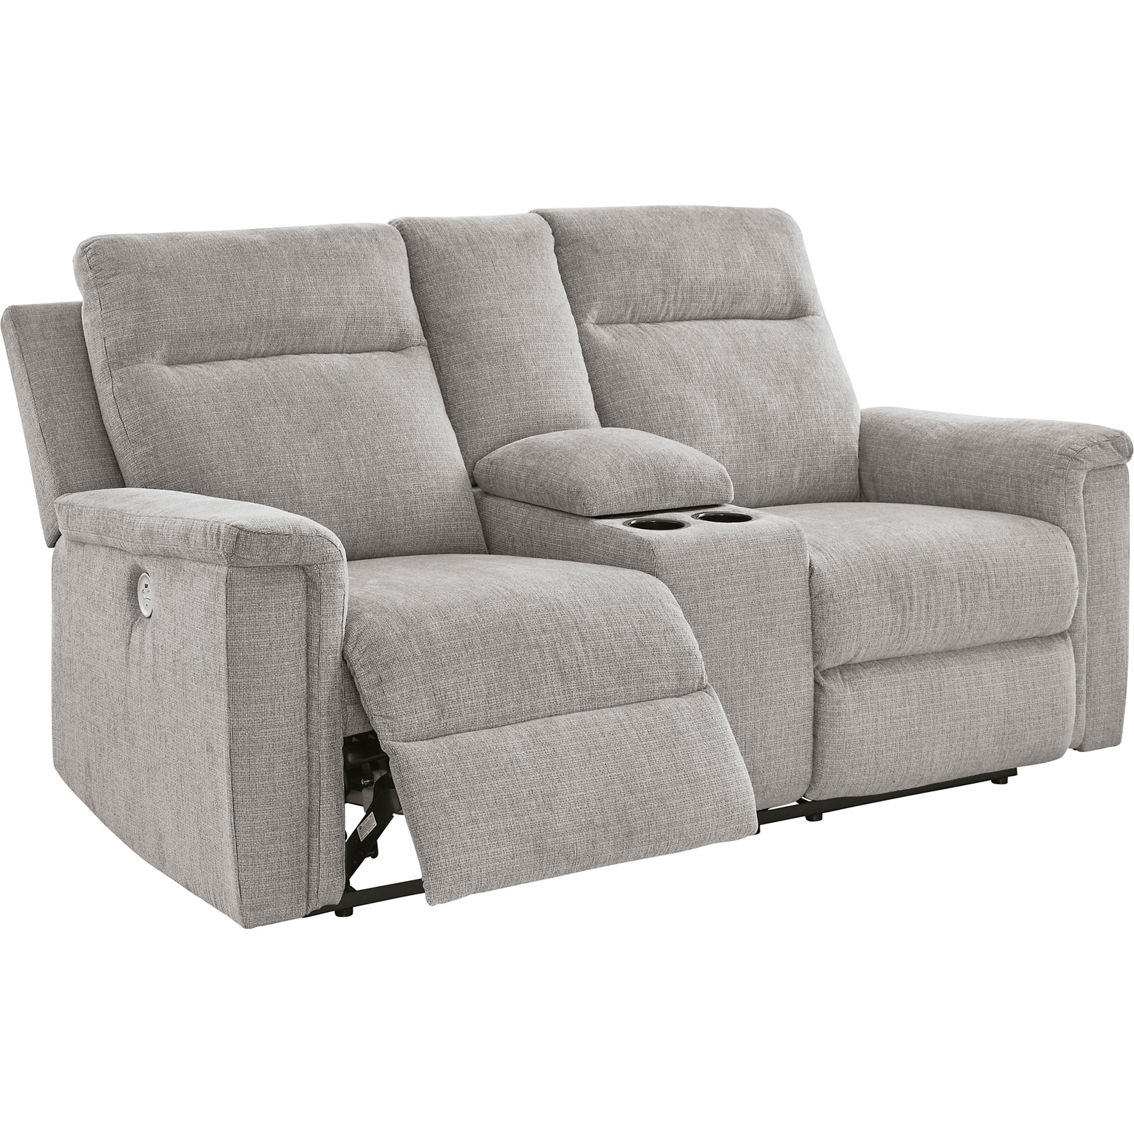 Signature Design by Ashley Barnsana Power Reclining Loveseat with Console - Image 2 of 6